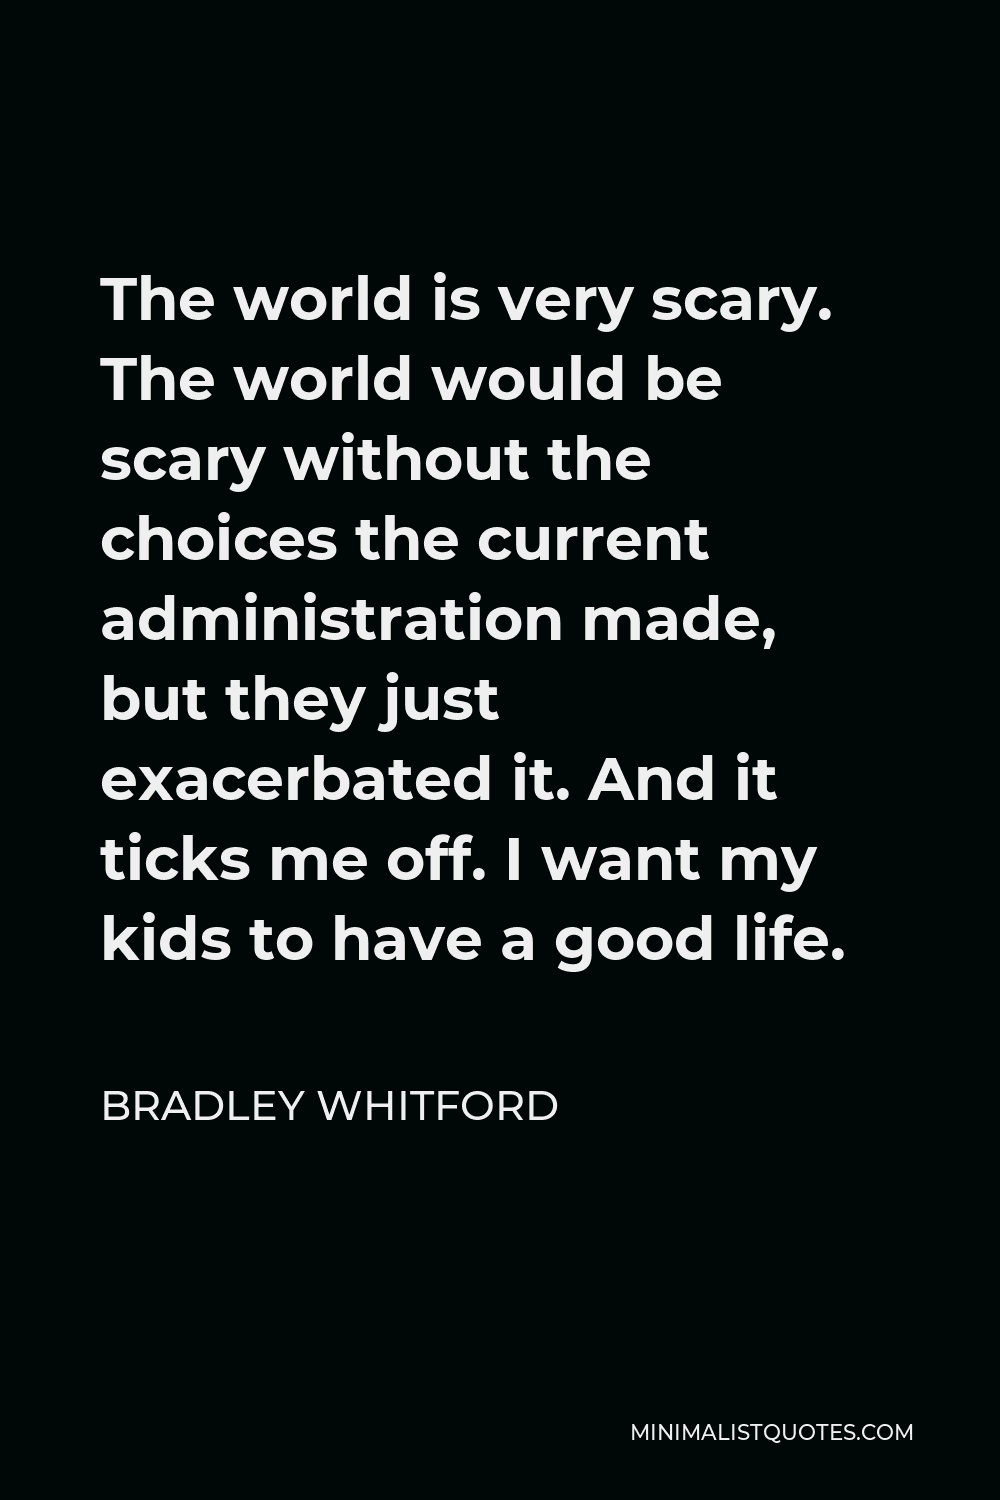 Bradley Whitford Quote - The world is very scary. The world would be scary without the choices the current administration made, but they just exacerbated it. And it ticks me off. I want my kids to have a good life.